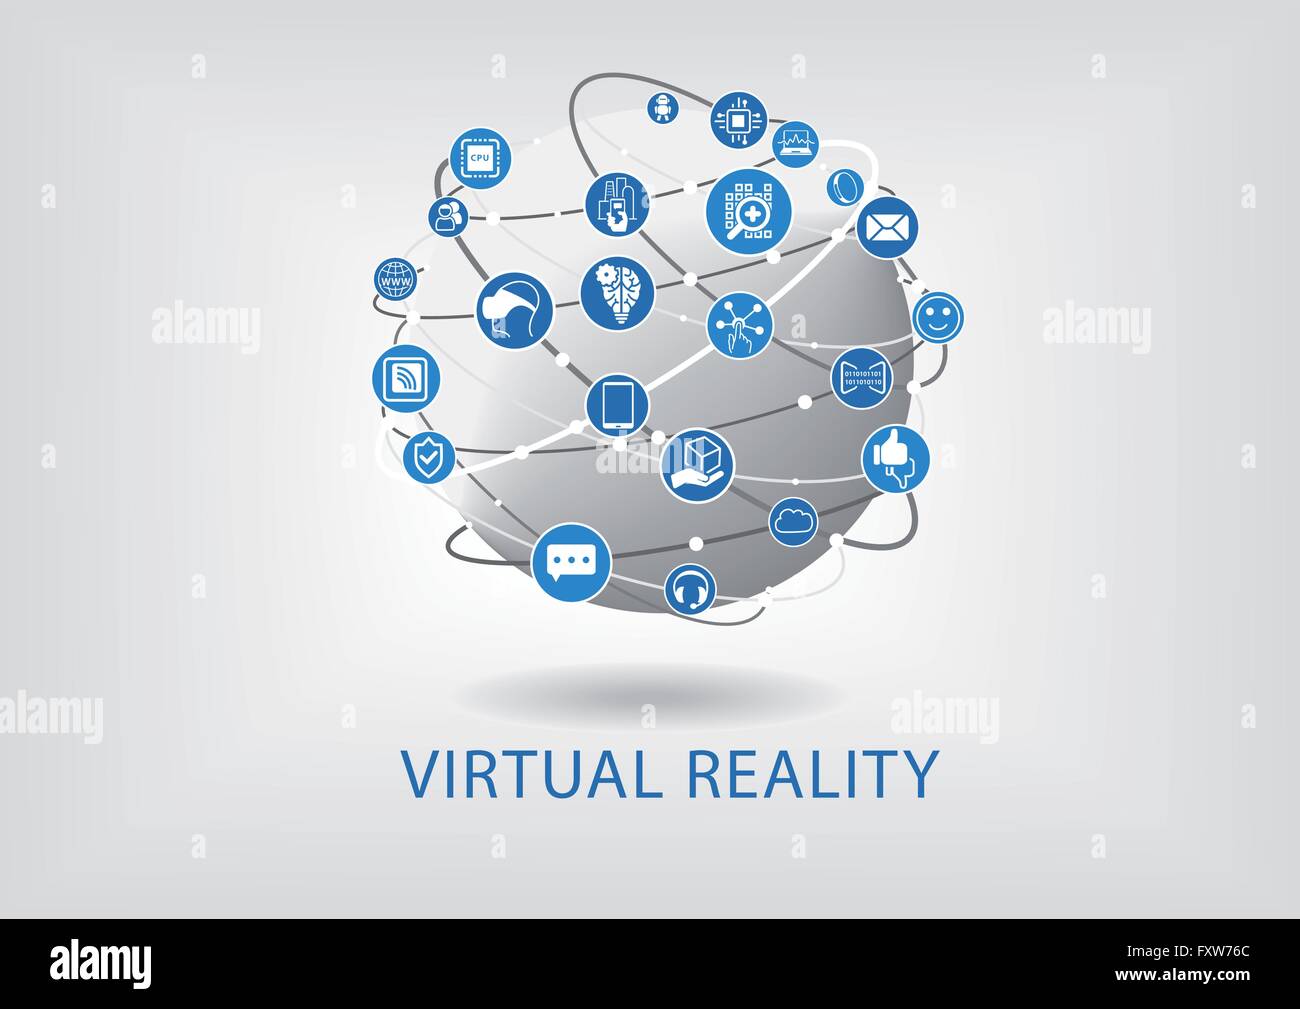 Virtual reality vector infographic and background Stock Vector